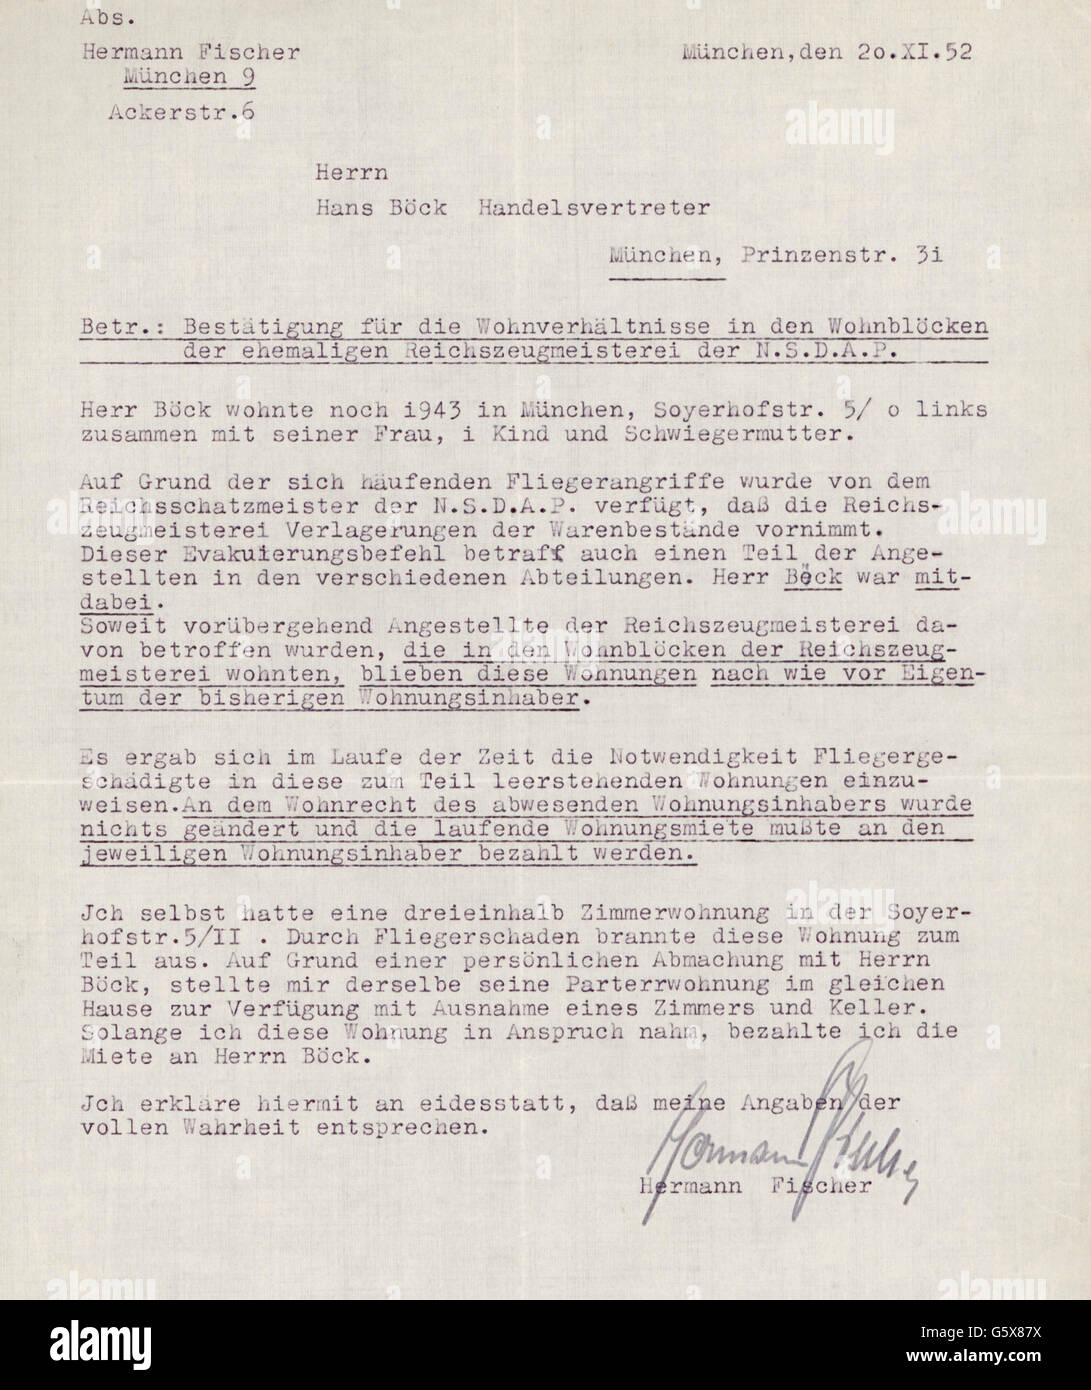 post war period,denazification,correspondence,letter from Hermann Fischer to Hans Böck,confirmation of the housing conditions in the apartment buildings of the former Reich Quartermaster's Office(Reichszeugmeisterei)of the NSDAP,Soyerhofstrasse 5,affidavit,Munich,20.11.1952,housing conditions,block of flats,blocks of flats,bomb out,bombing out,bombed out,air extraction,aerial warfare,Second World War / WWII,1950s,50s,20th century,no-people,post war period,post-war period,post-war years,post-war era,letter,letters,confirmation,conf,Additional-Rights-Clearences-Not Available Stock Photo